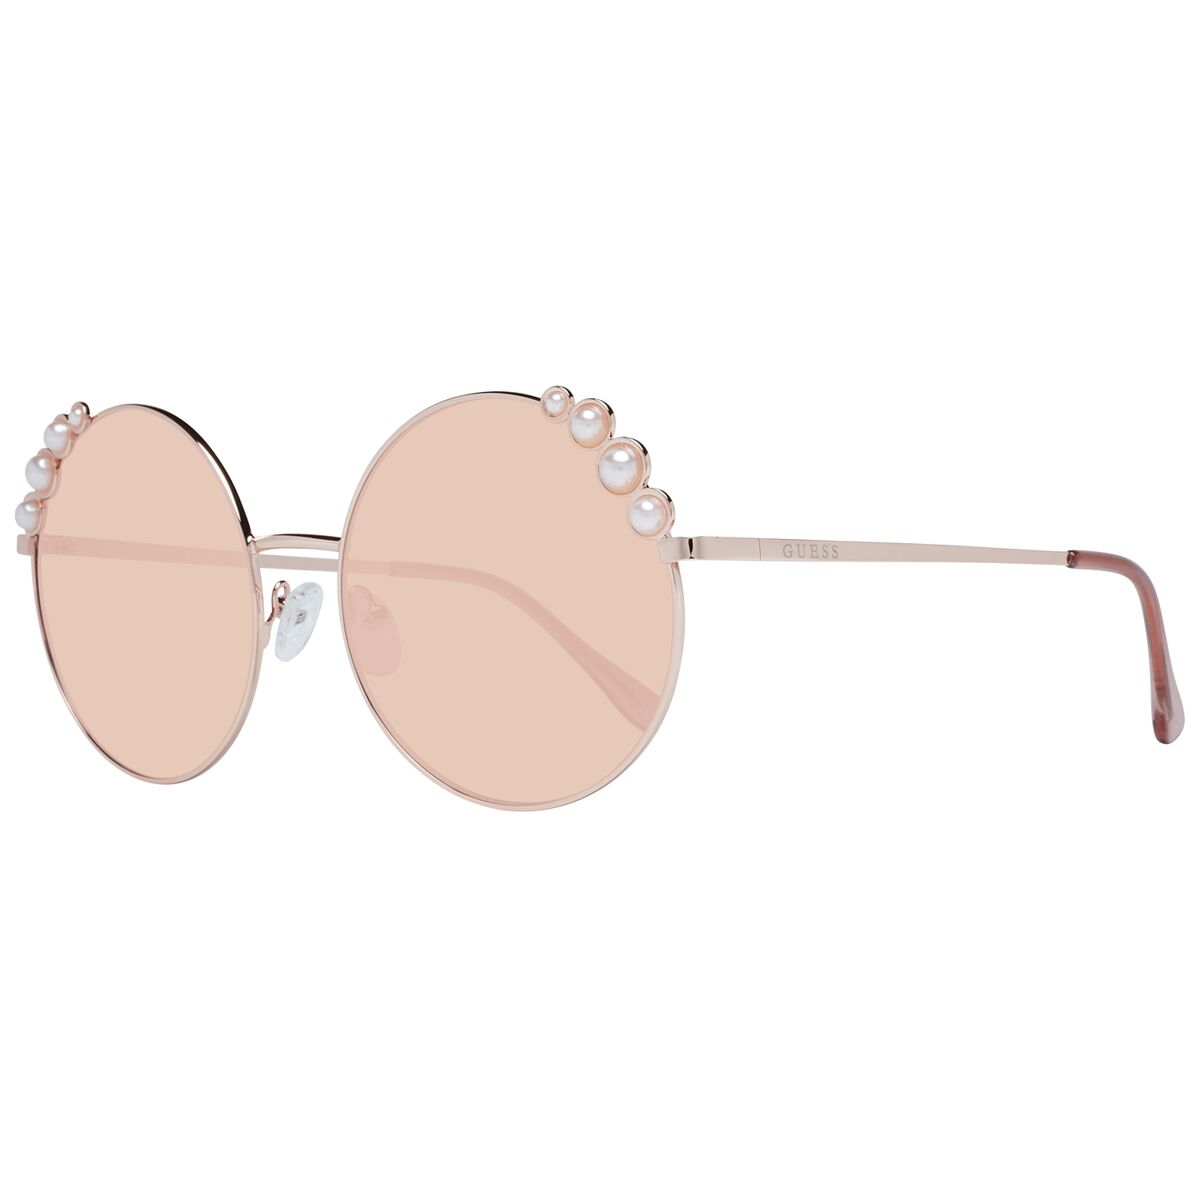 Guess Ladies' Sunglasses  Gf0355 5828t Gbby2 In Pink